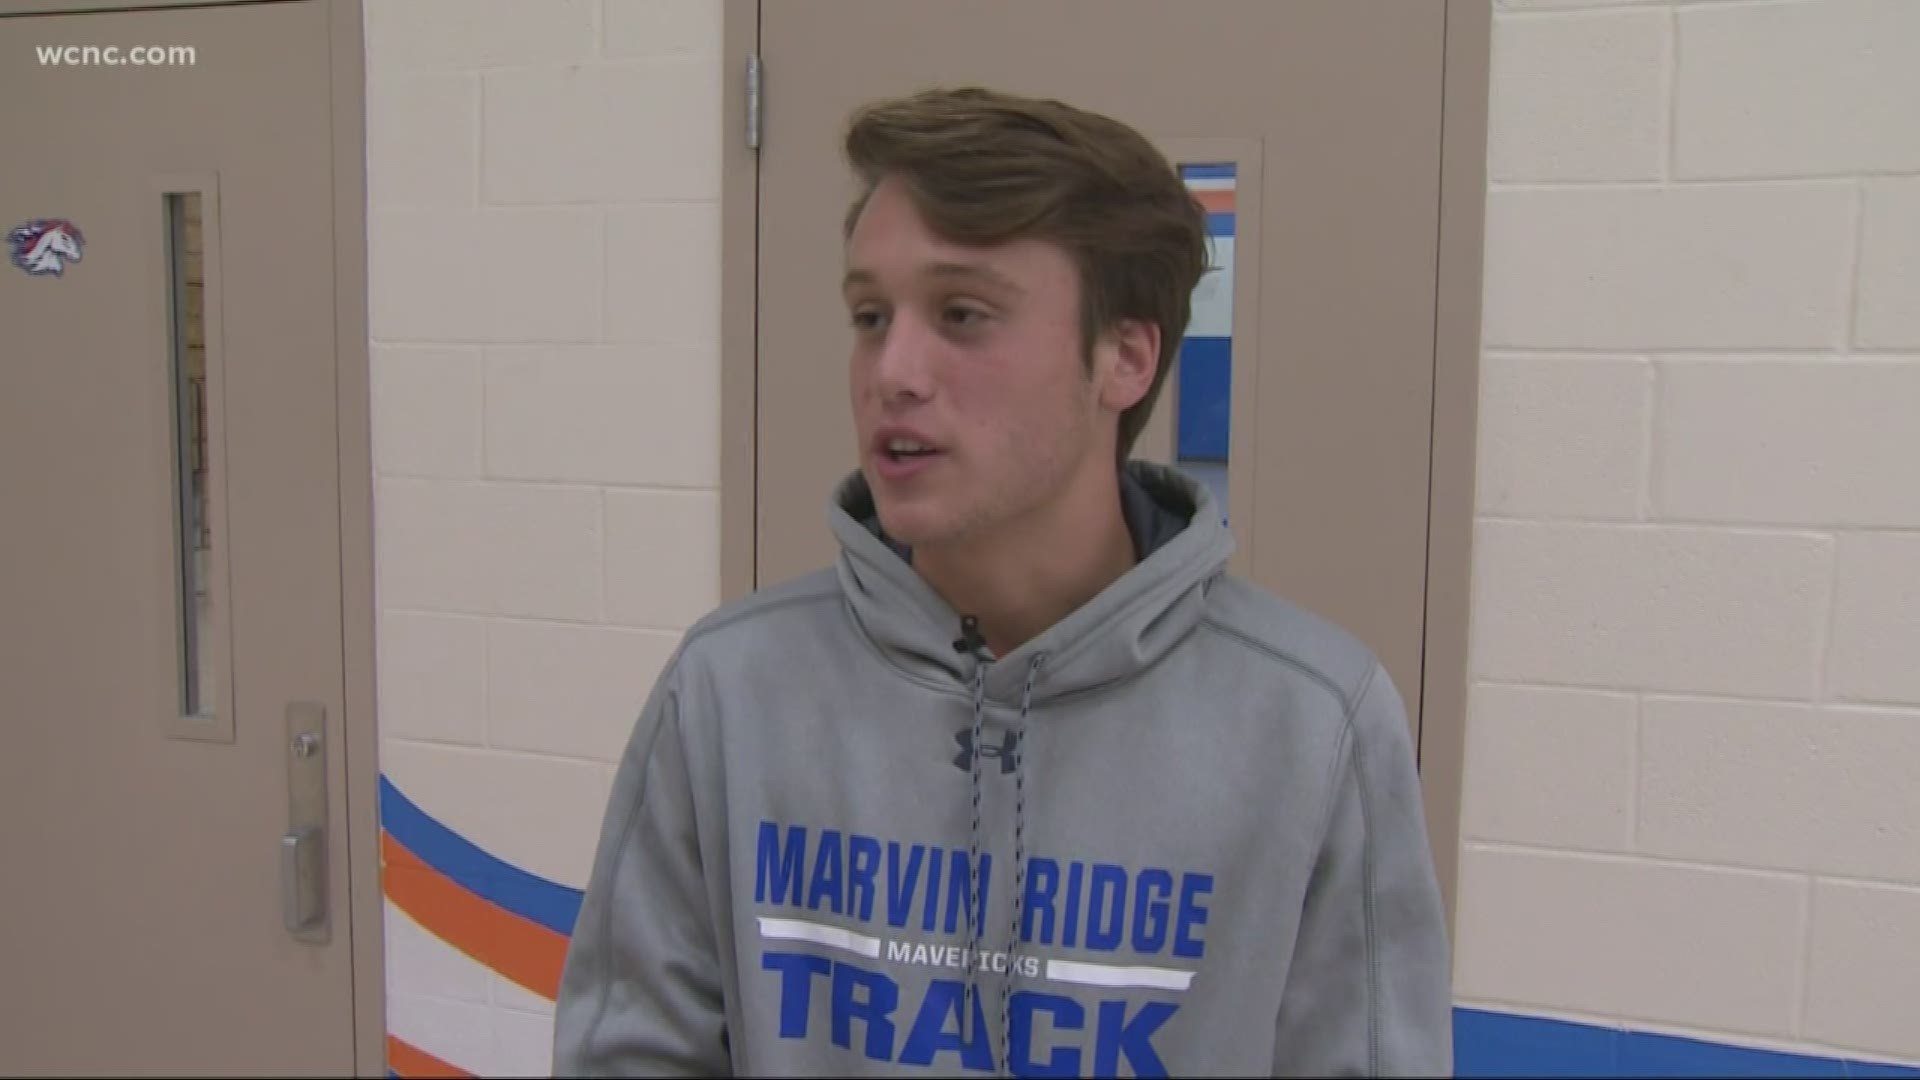 Gunner is a senior at Marvin Ridge High School on the cross country team.